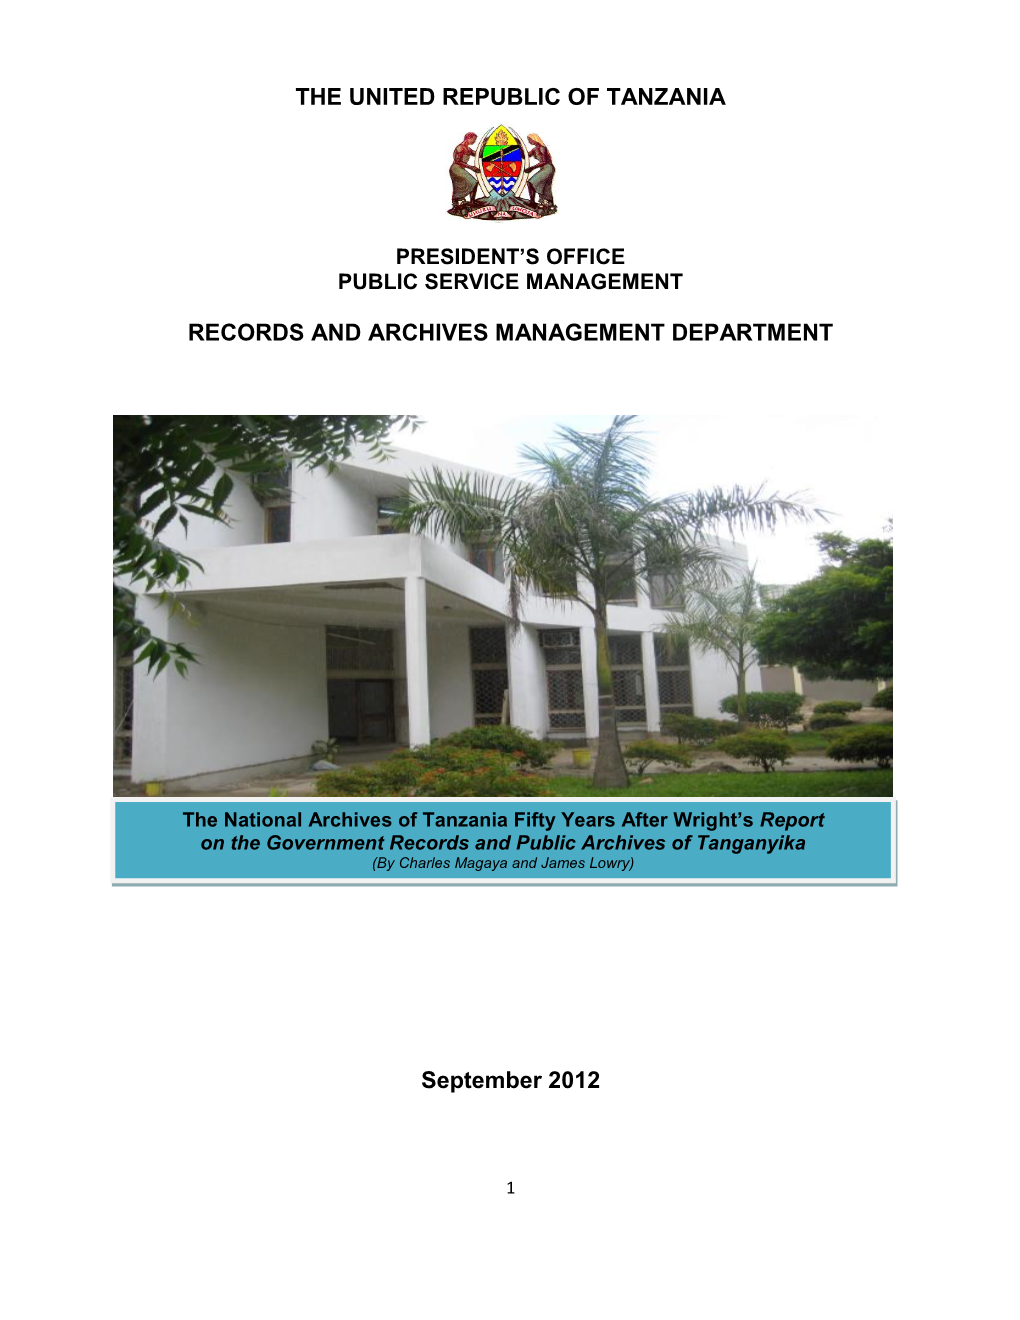 THE UNITED REPUBLIC of TANZANIA RECORDS and ARCHIVES MANAGEMENT DEPARTMENT September 2012